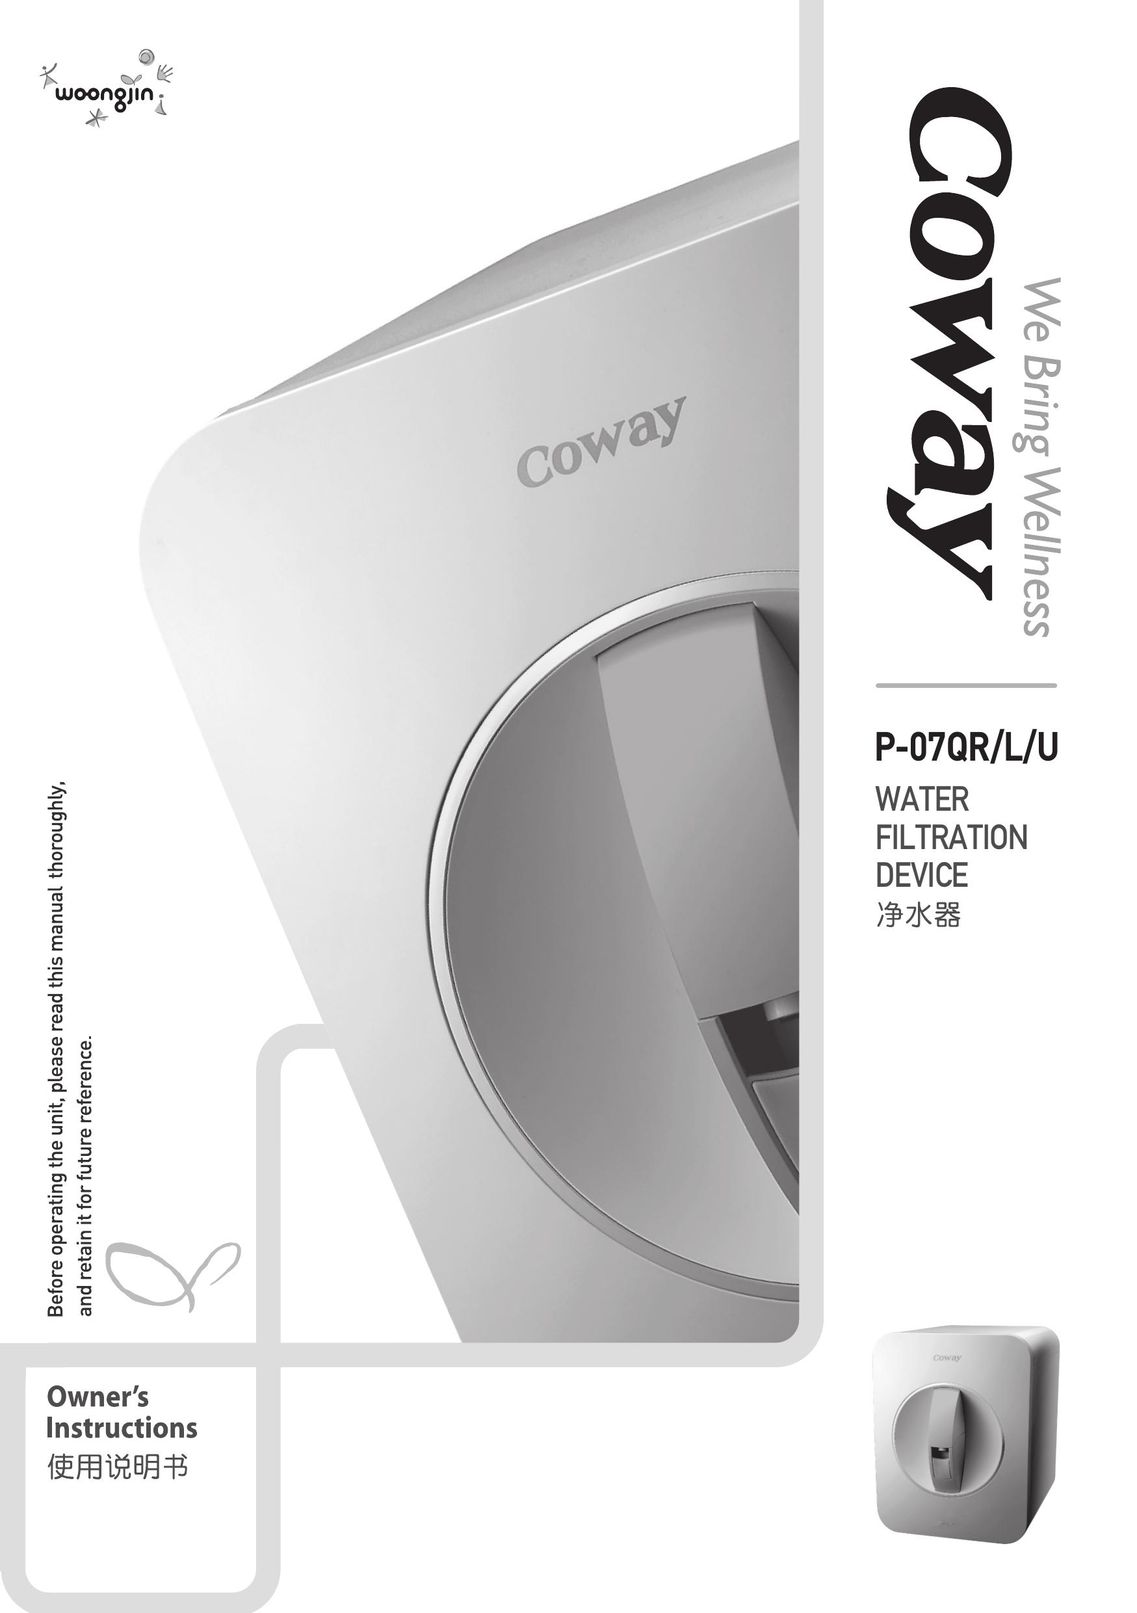 Coway P-07QL Water System User Manual